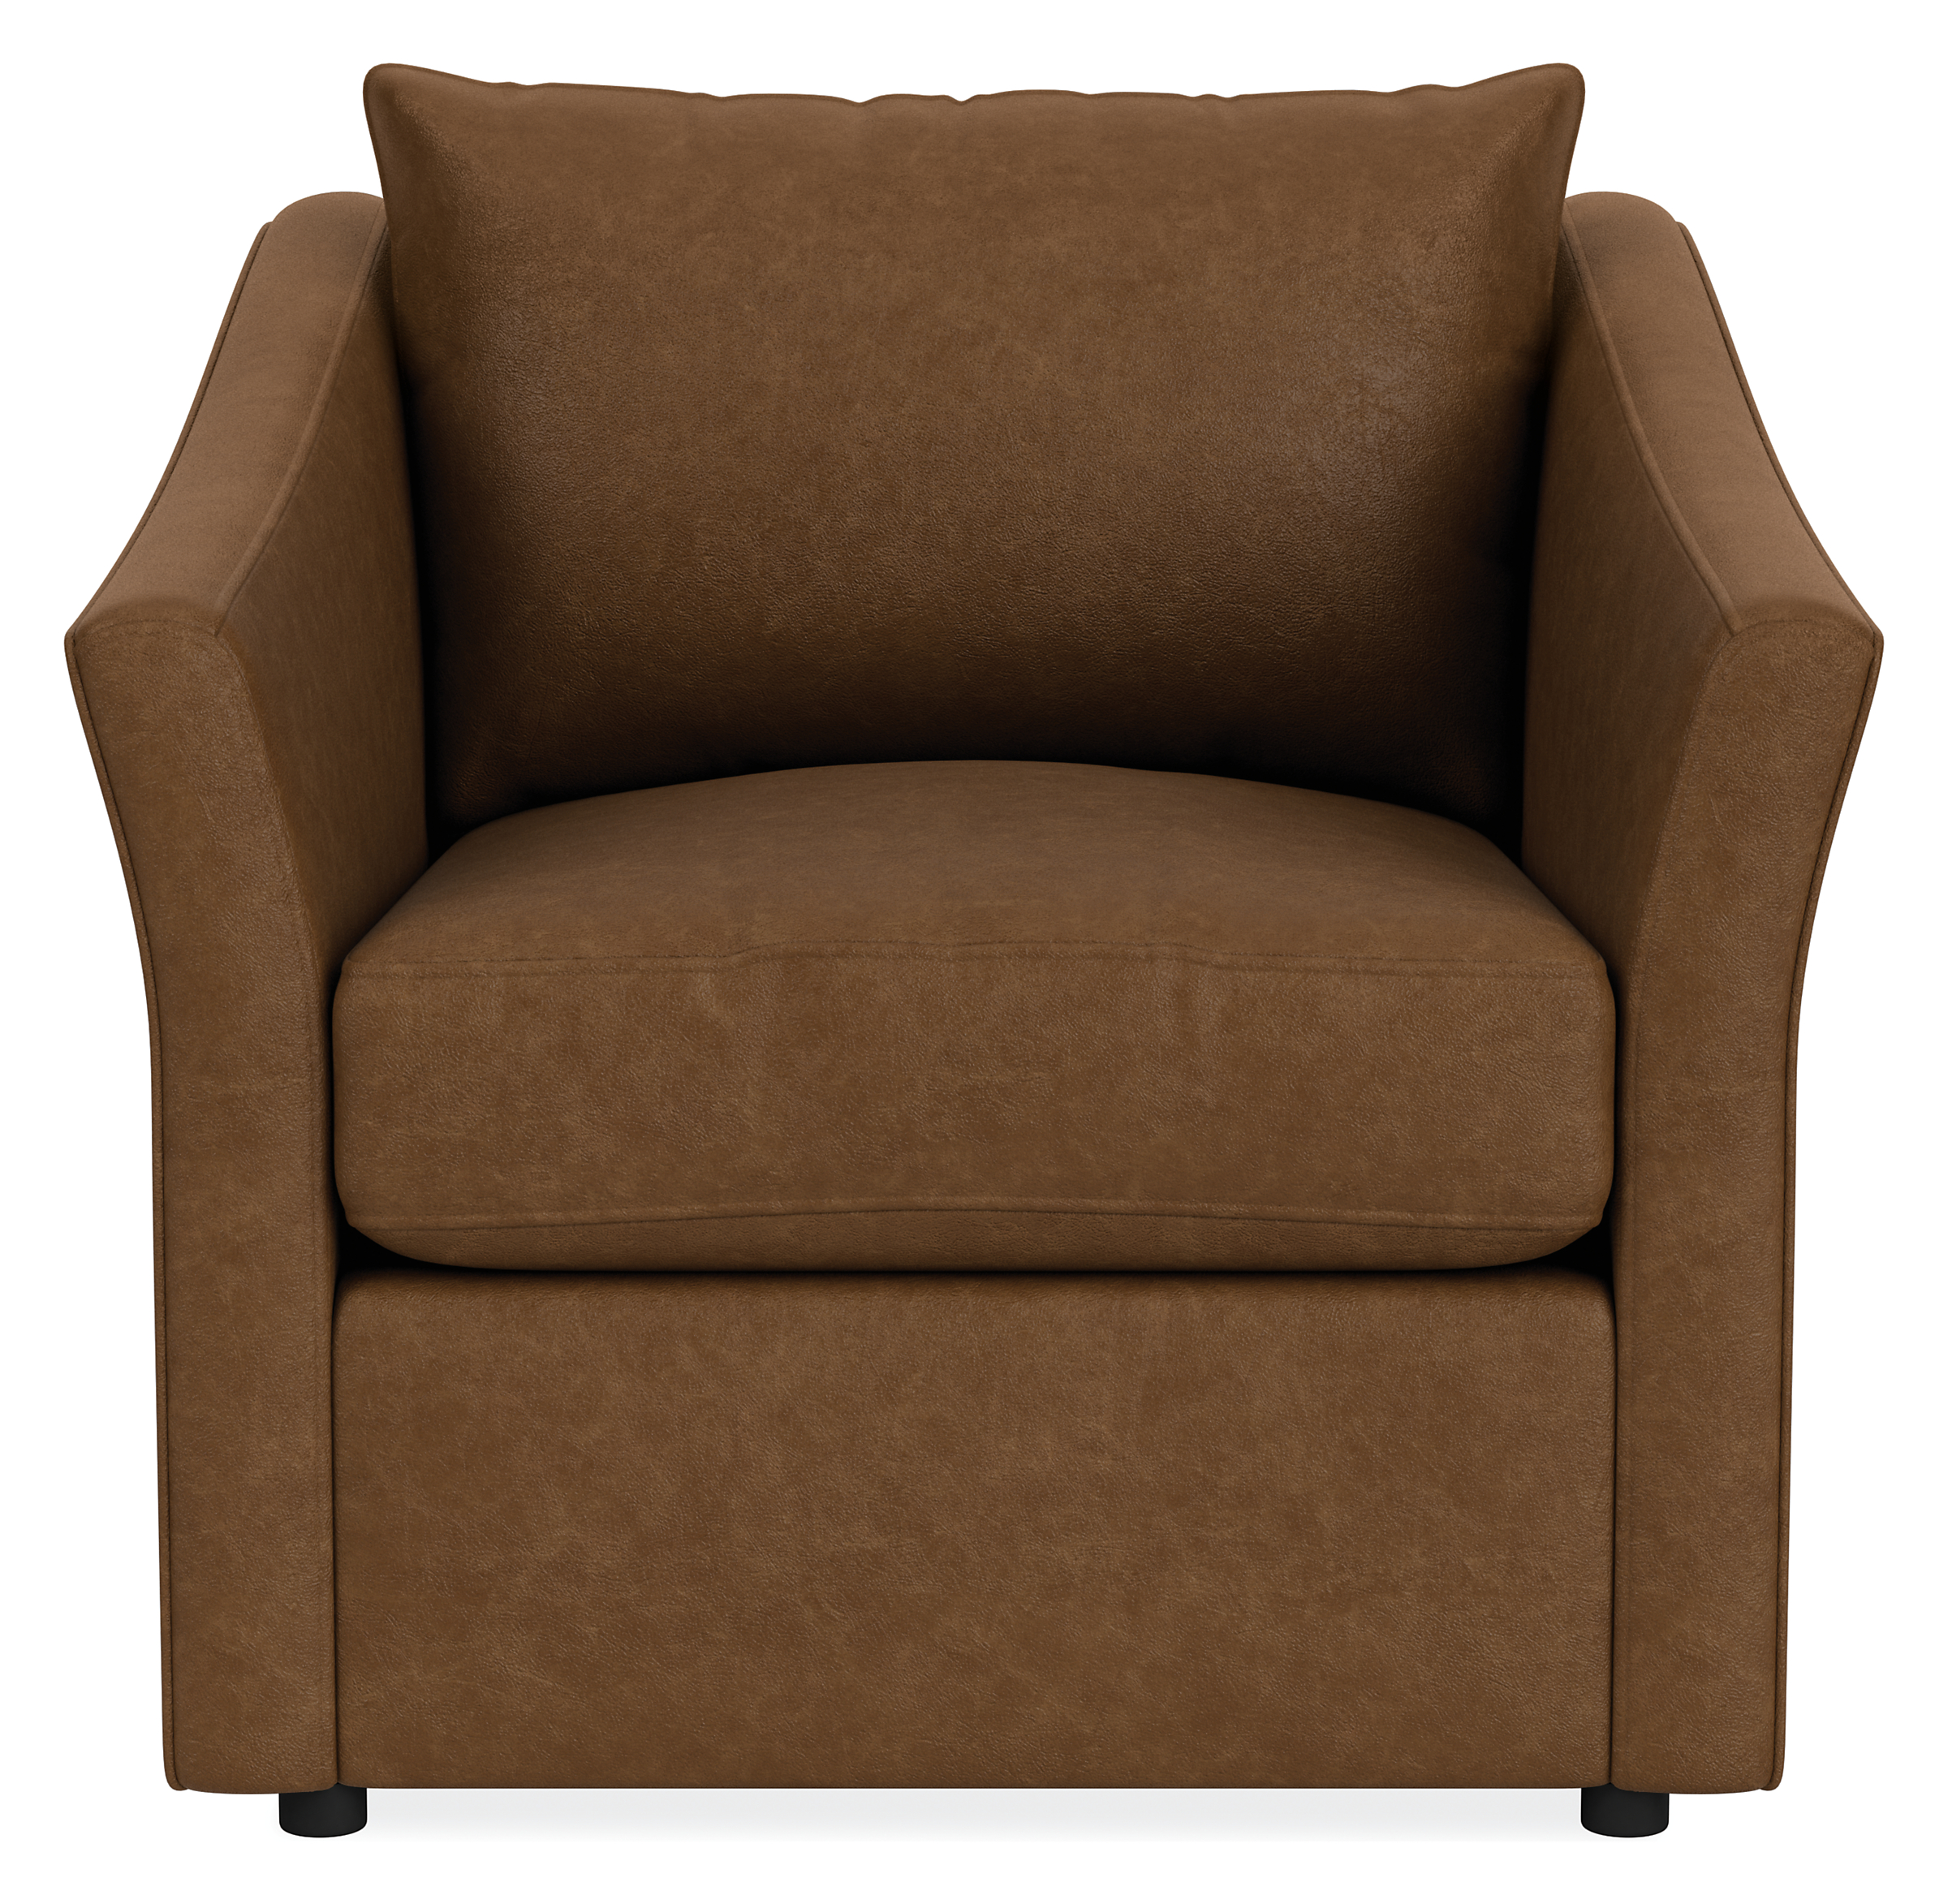 Front view of Maeve Chair in Palermo Bourbon.